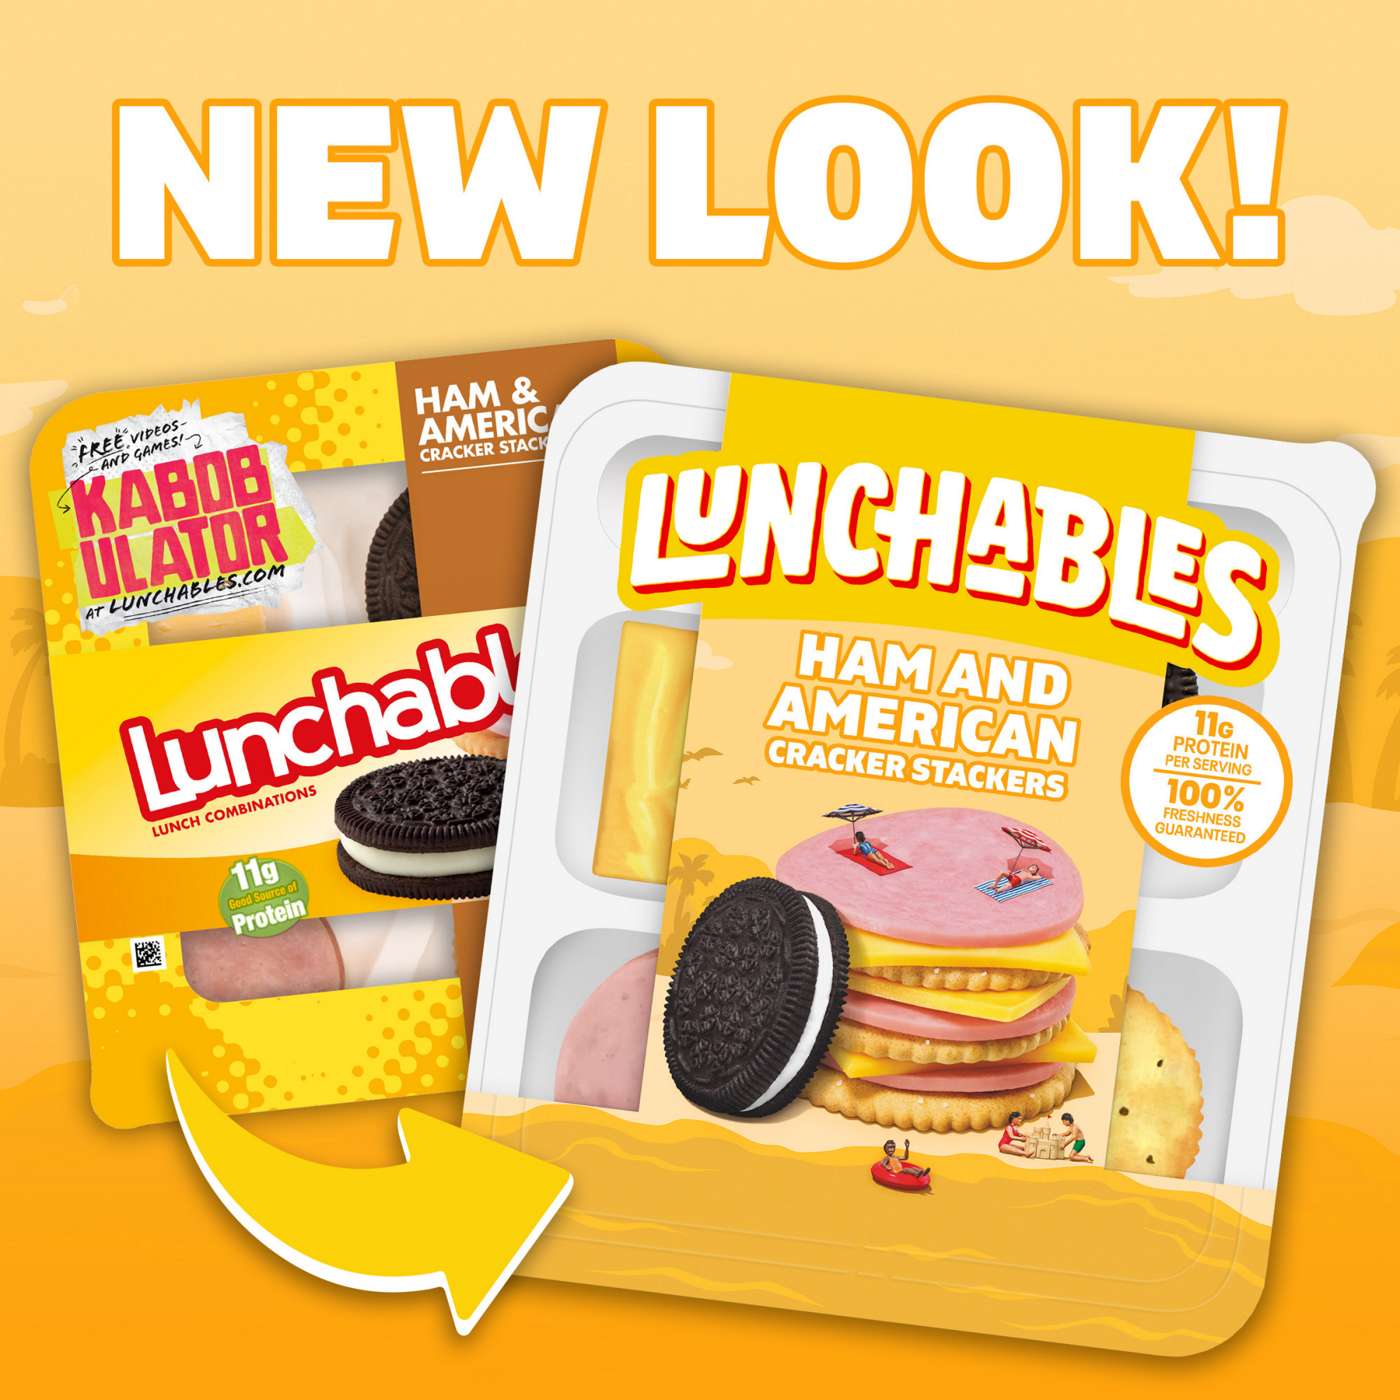 Lunchables Snack Kit Tray - Ham & American Cracker Stackers with Chocolate Creme Cookies; image 5 of 6